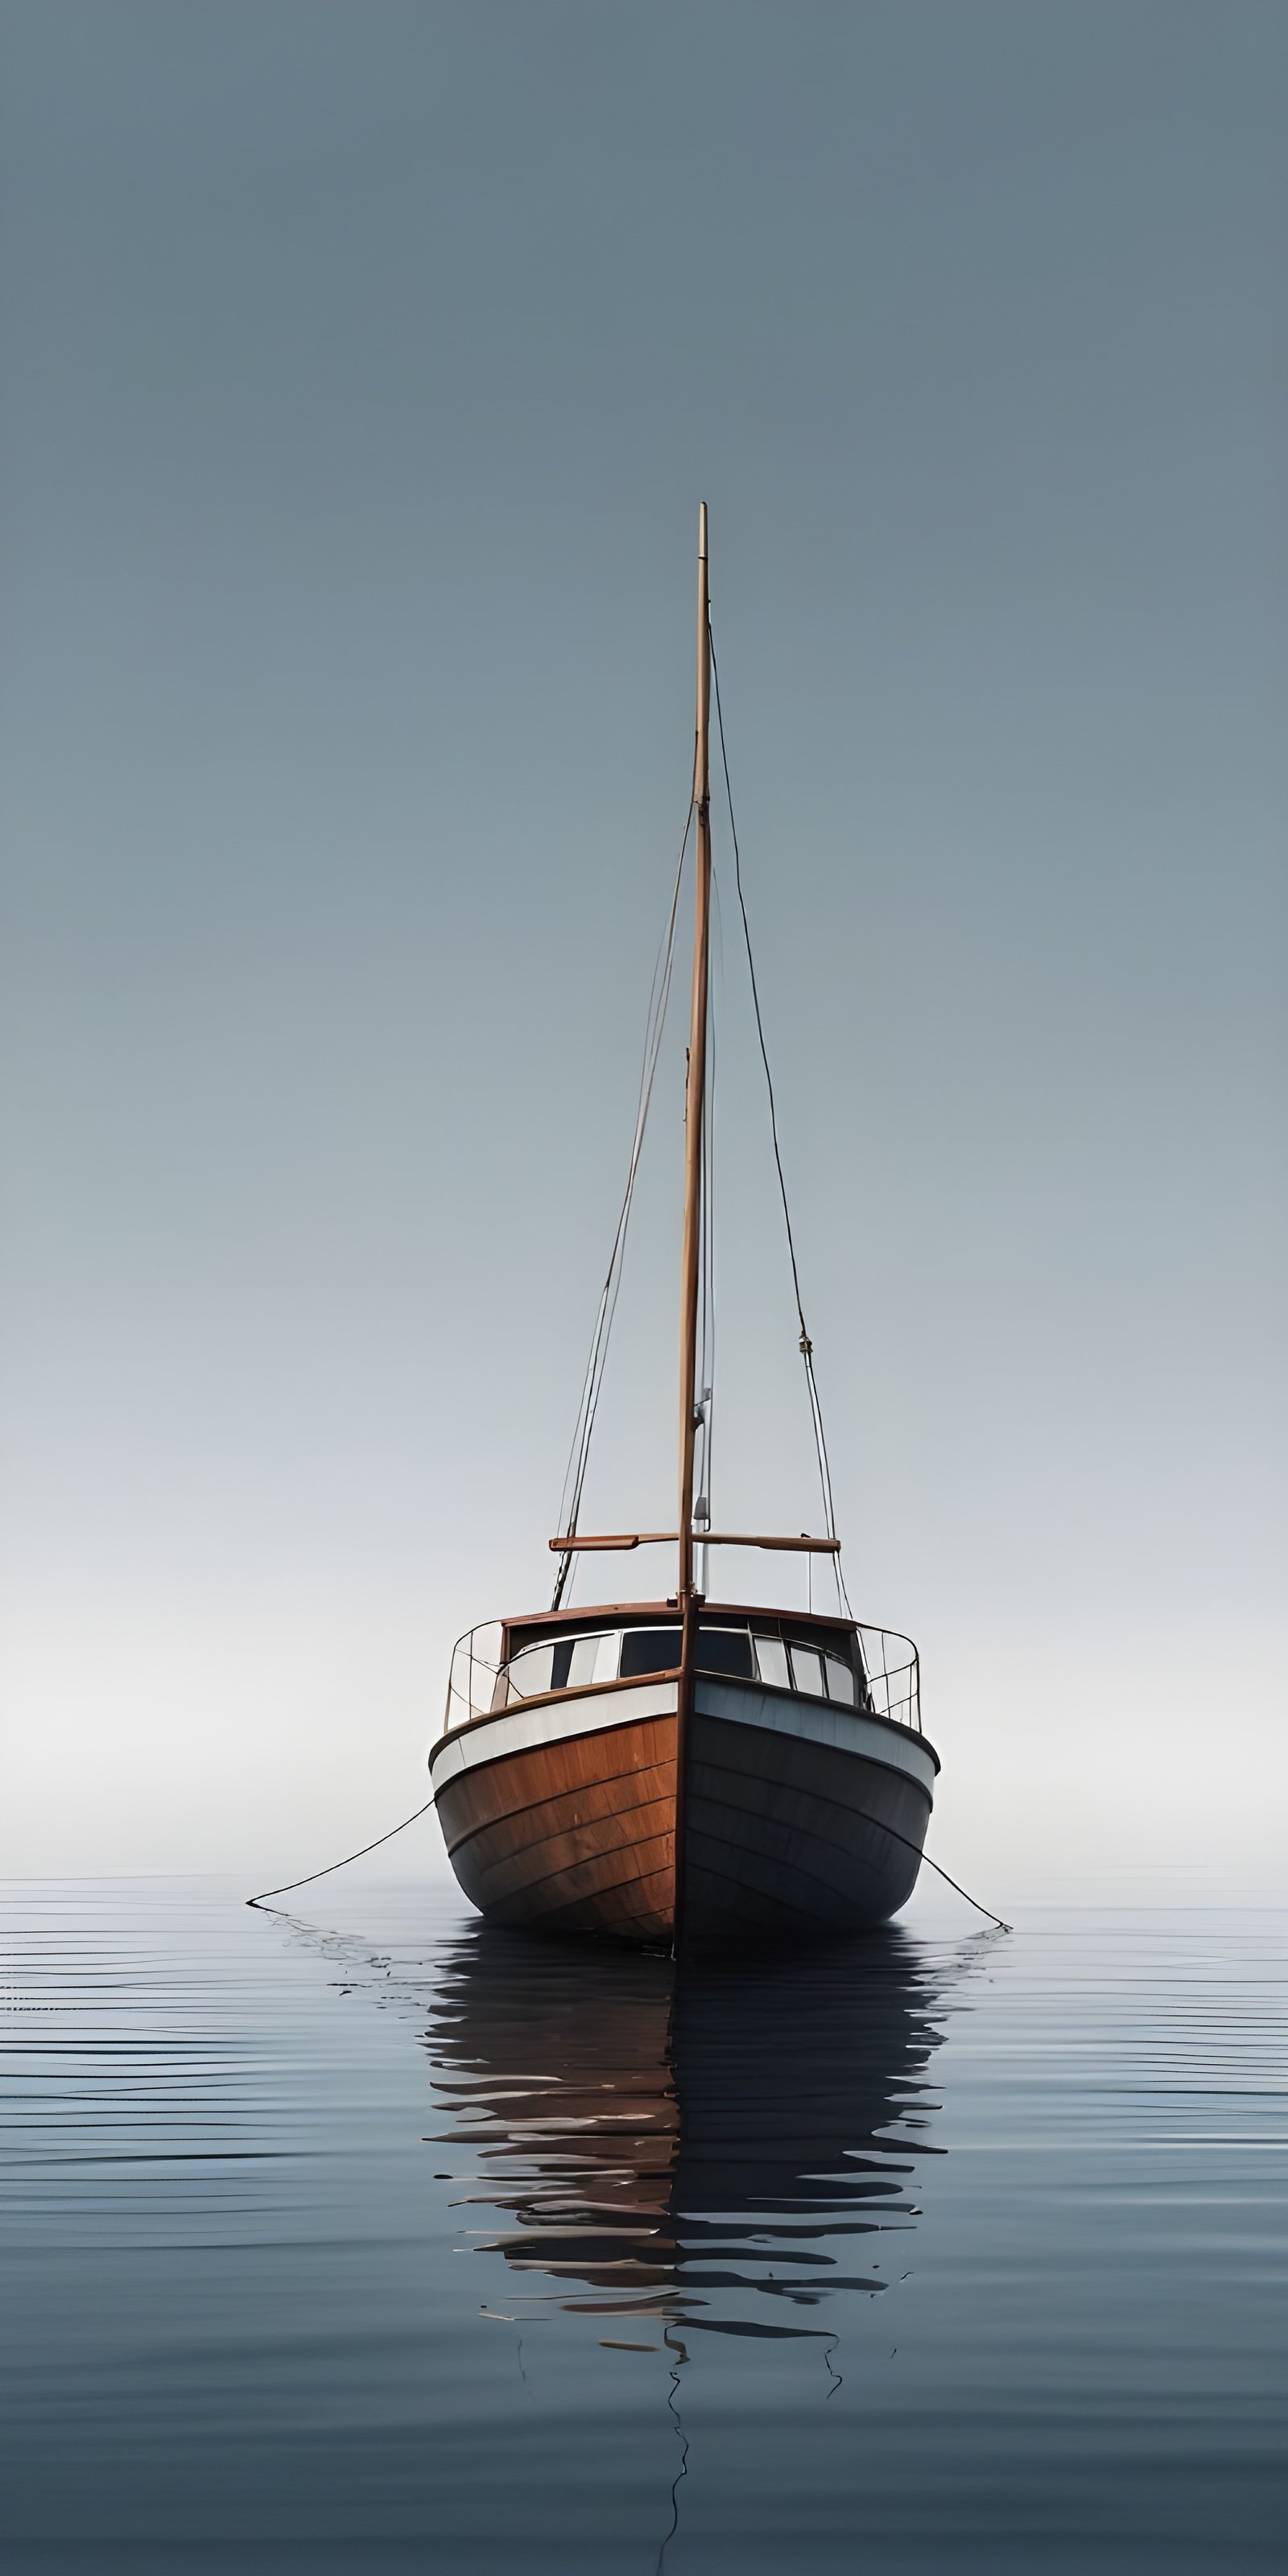 Boat and Water Minimalistic Phone Wallpapers